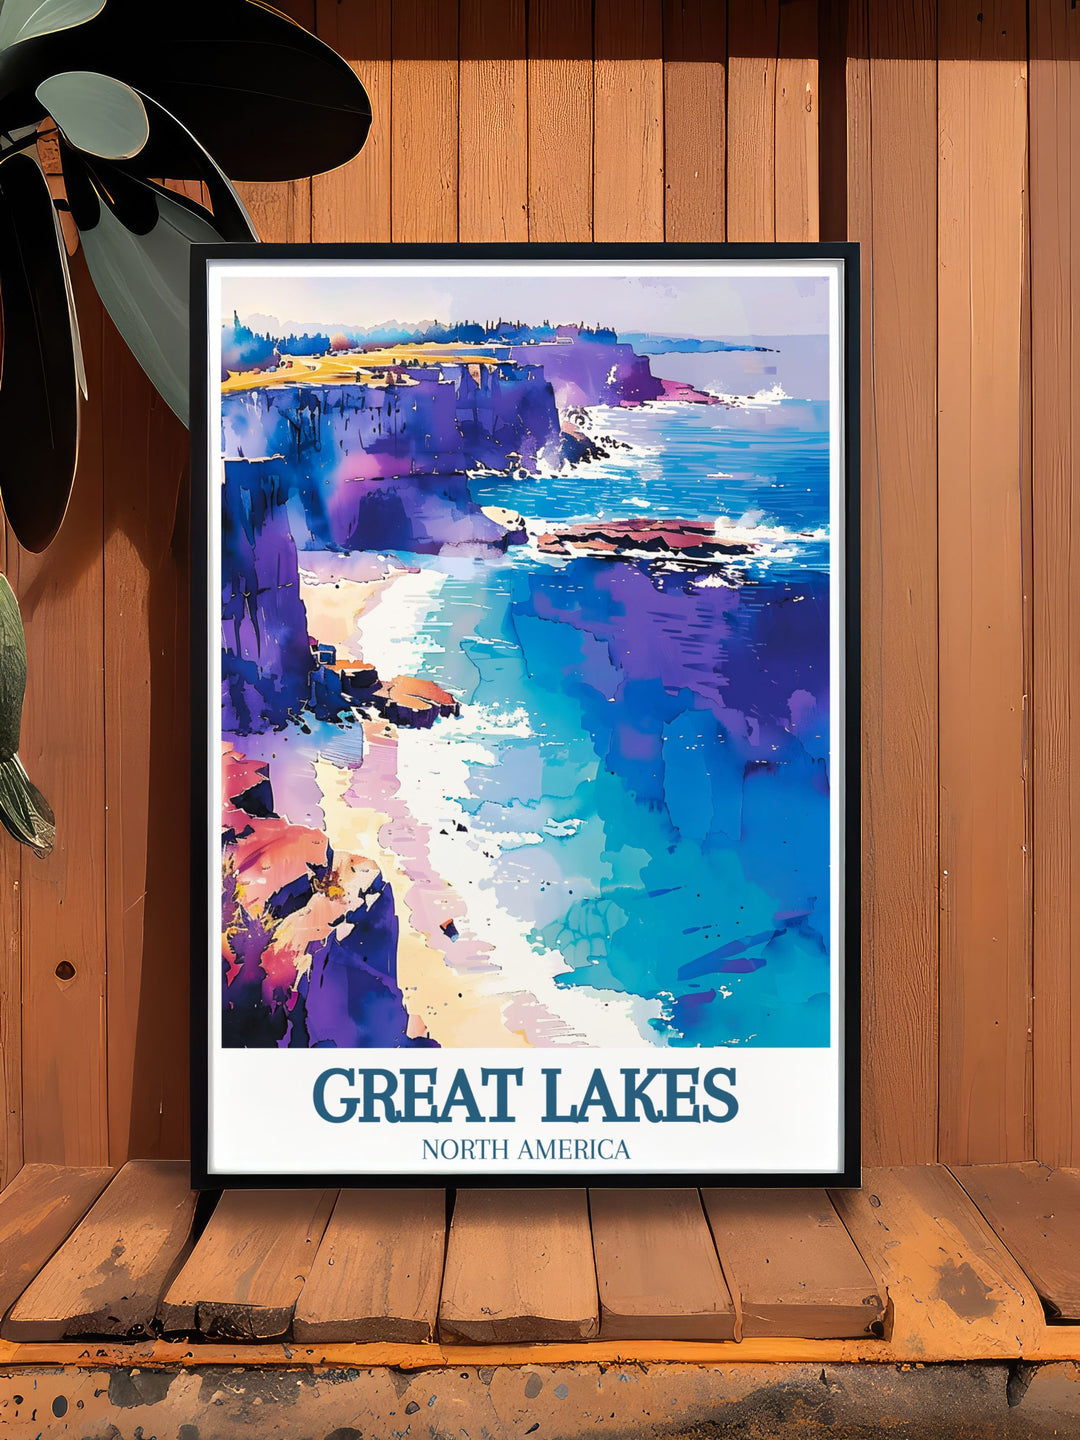 Showcasing the unique cultural landscape of Kelleys Island, this travel poster highlights the islands picturesque beauty and historical sites, perfect for enhancing any room.